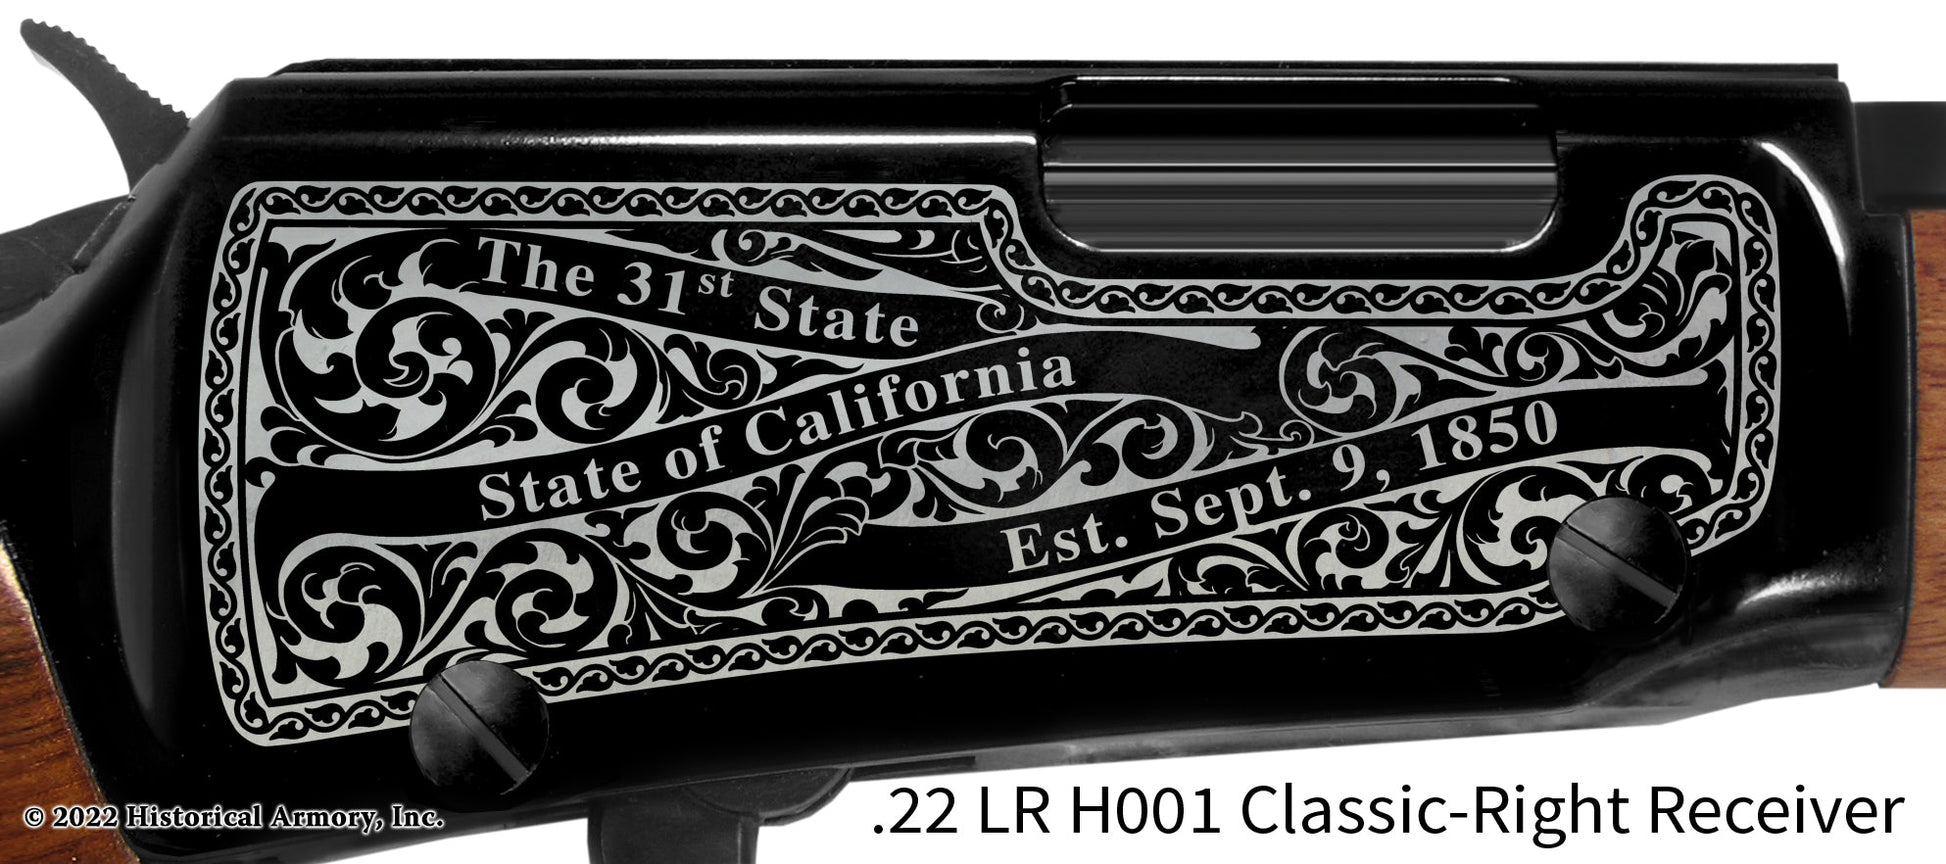 Mariposa County California Engraved Henry H001 Rifle